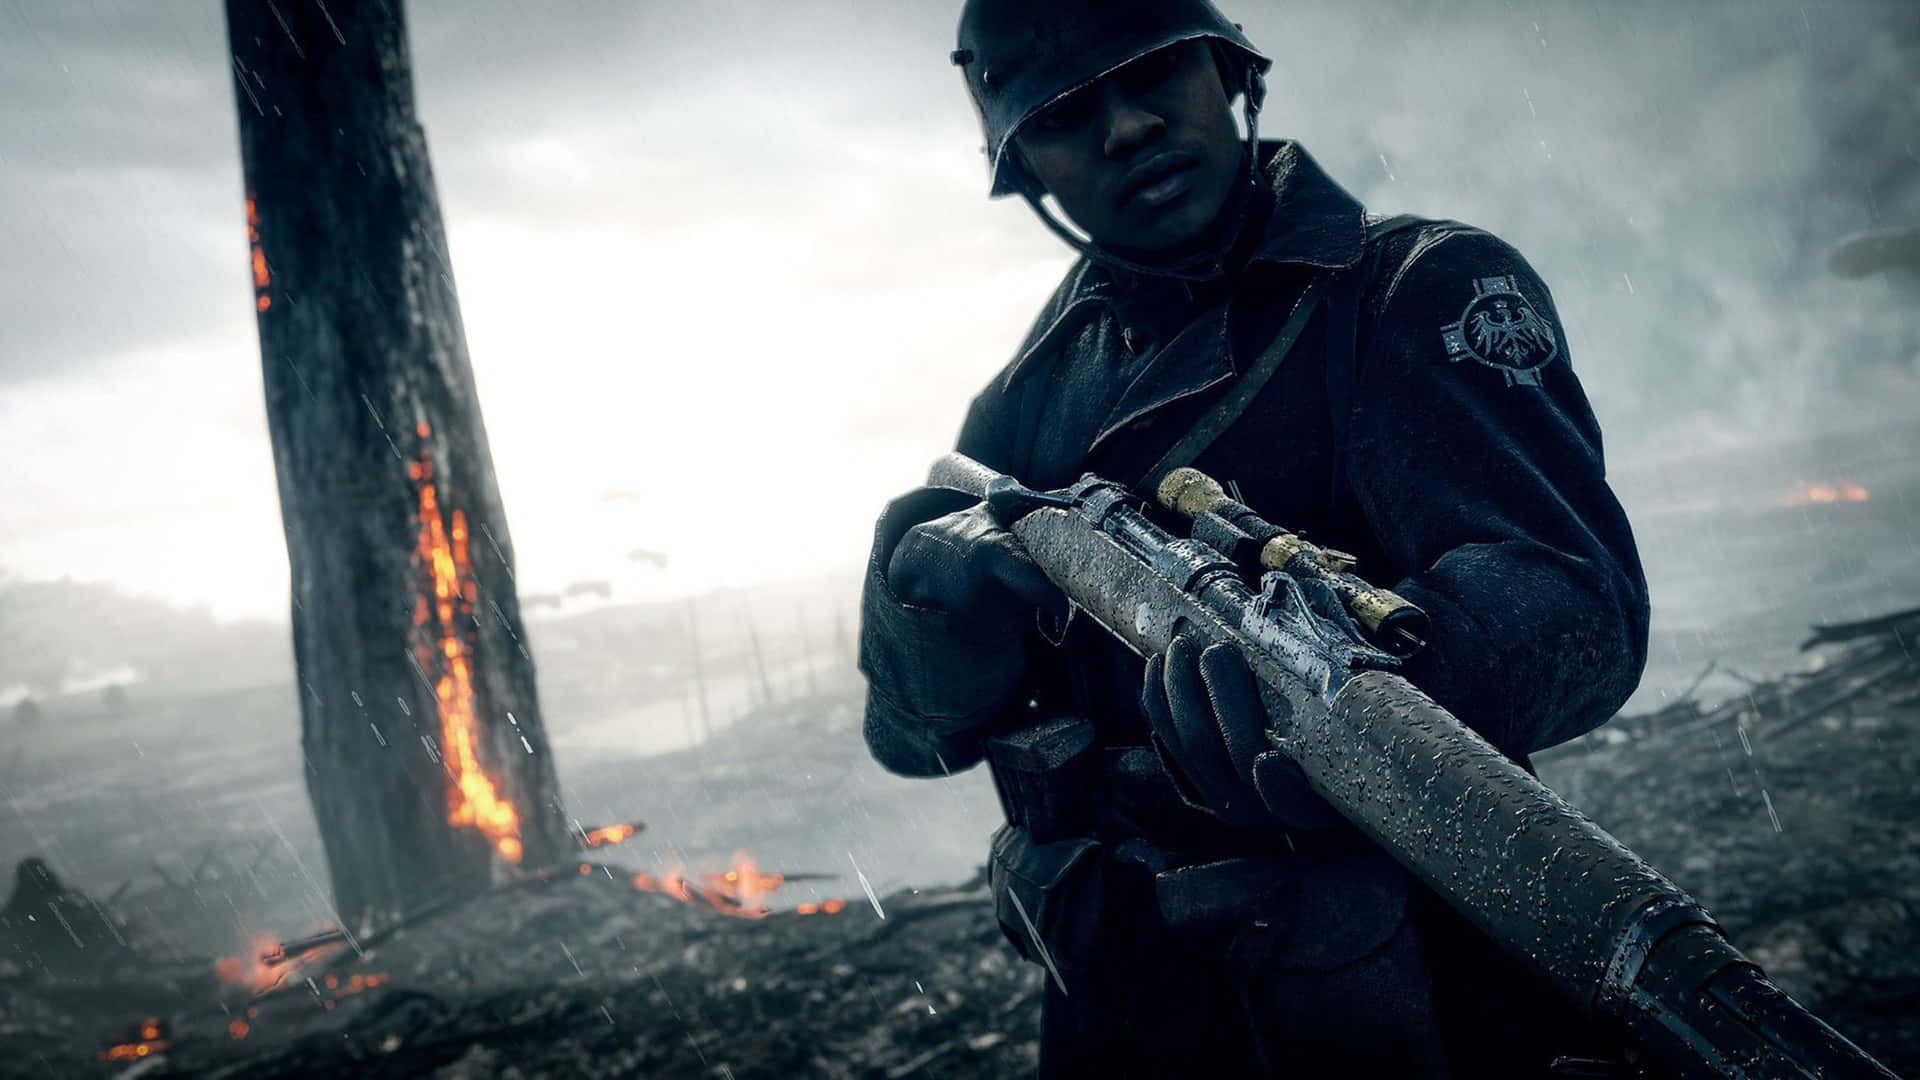 A Soldier Is Holding A Rifle In Front Of A Fire